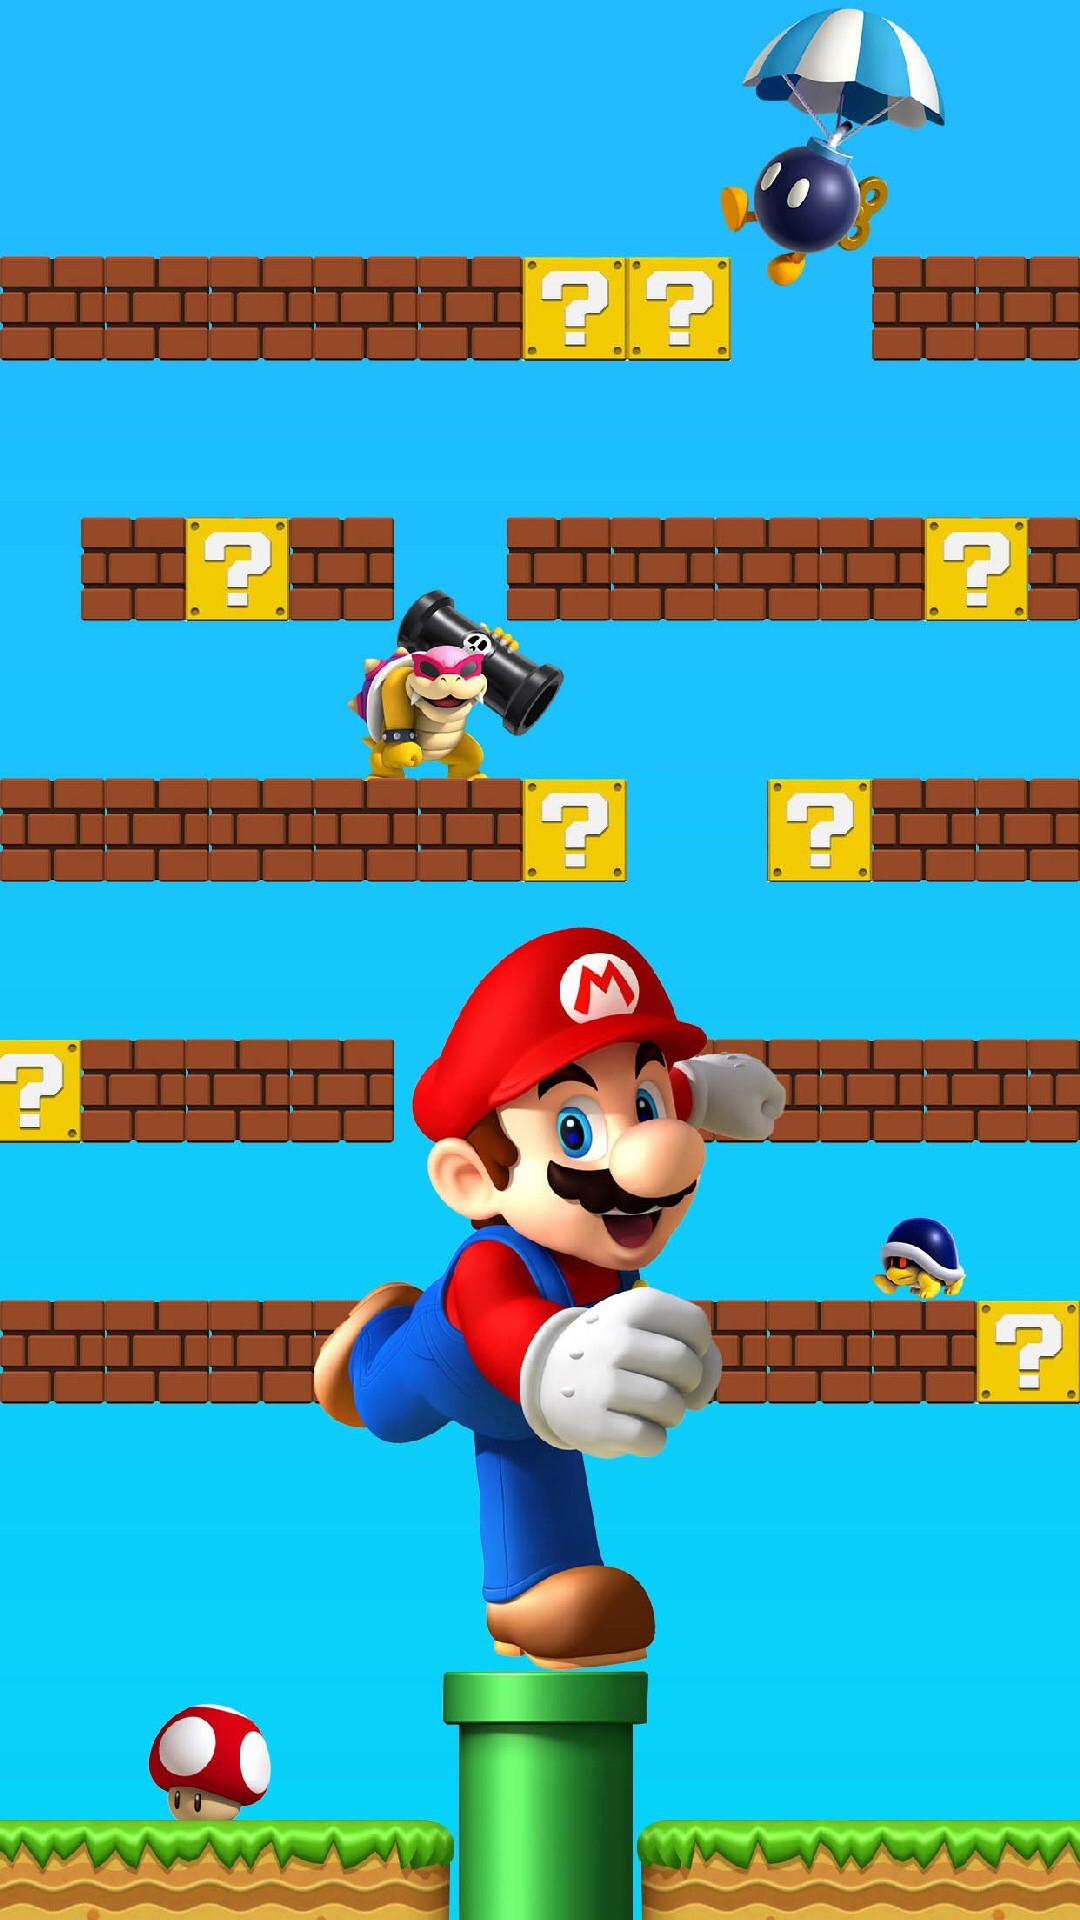 1080x1920 Shelves Super Mario Colorful Awesome Ð¡omputer Graphics. Wallpapers  AndroidCute WallpapersIphone ...